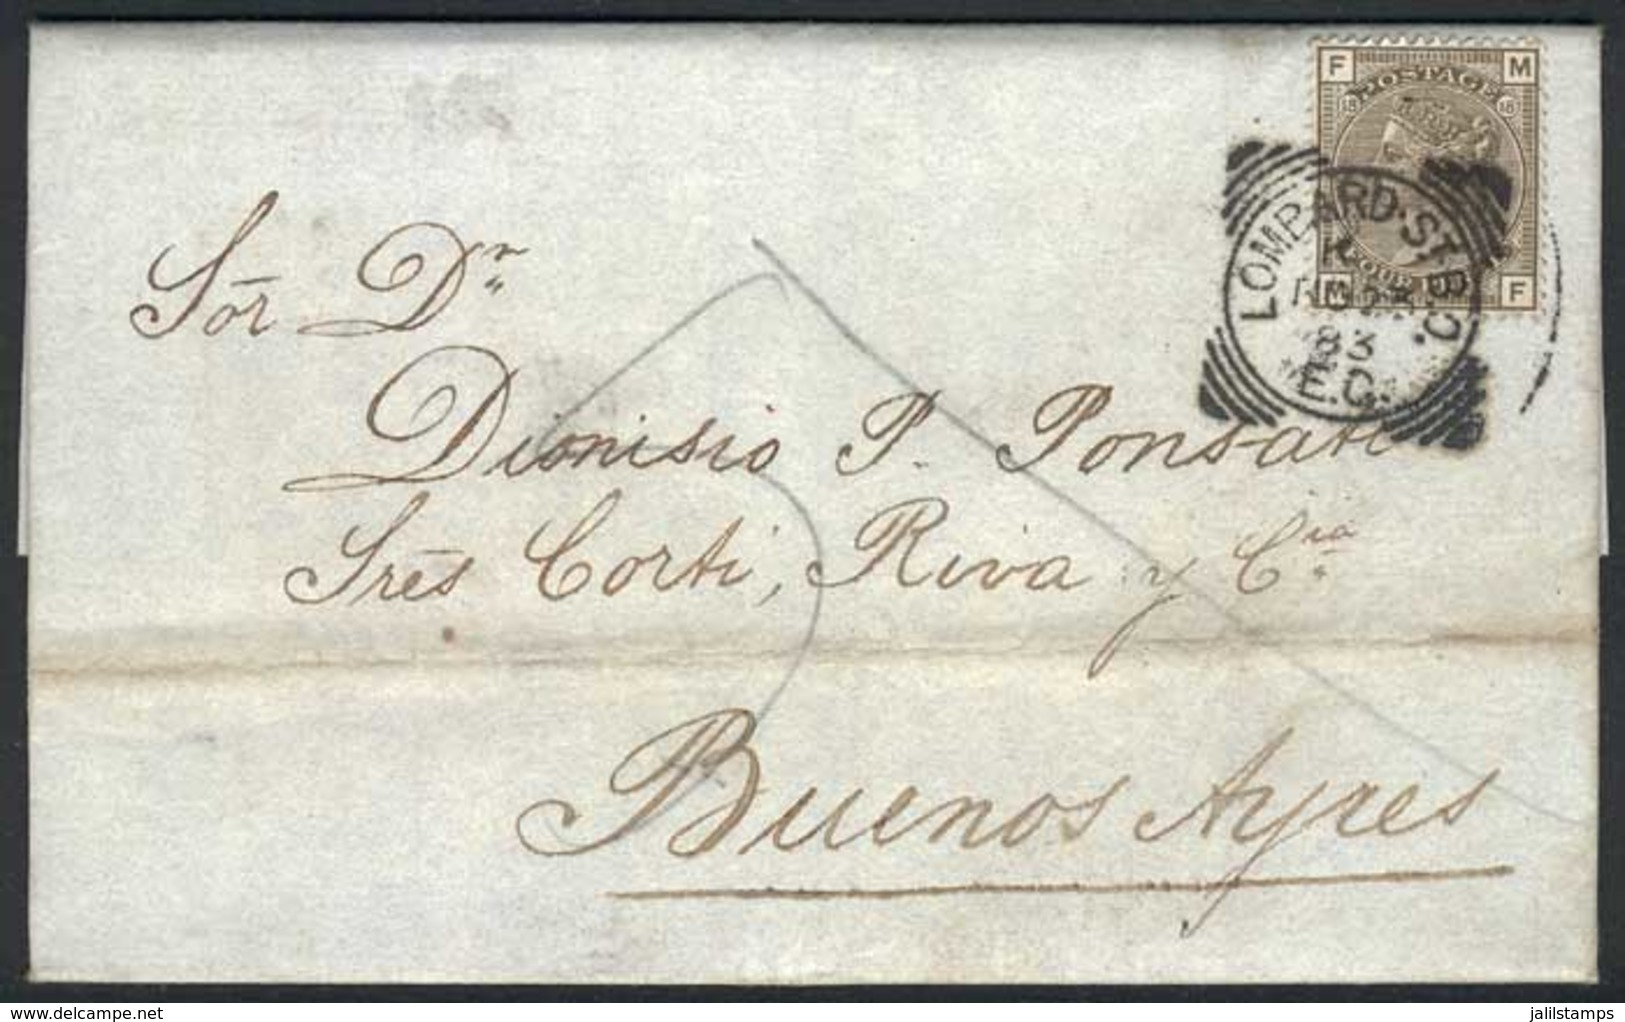 1343 GREAT BRITAIN: 23/NO/1883 LONDON - ARGENTINA: Folded Letter Franked By Sc.84 Plate 18, Cancelled LOMBARD ST. B.O. - - ...-1840 Prephilately